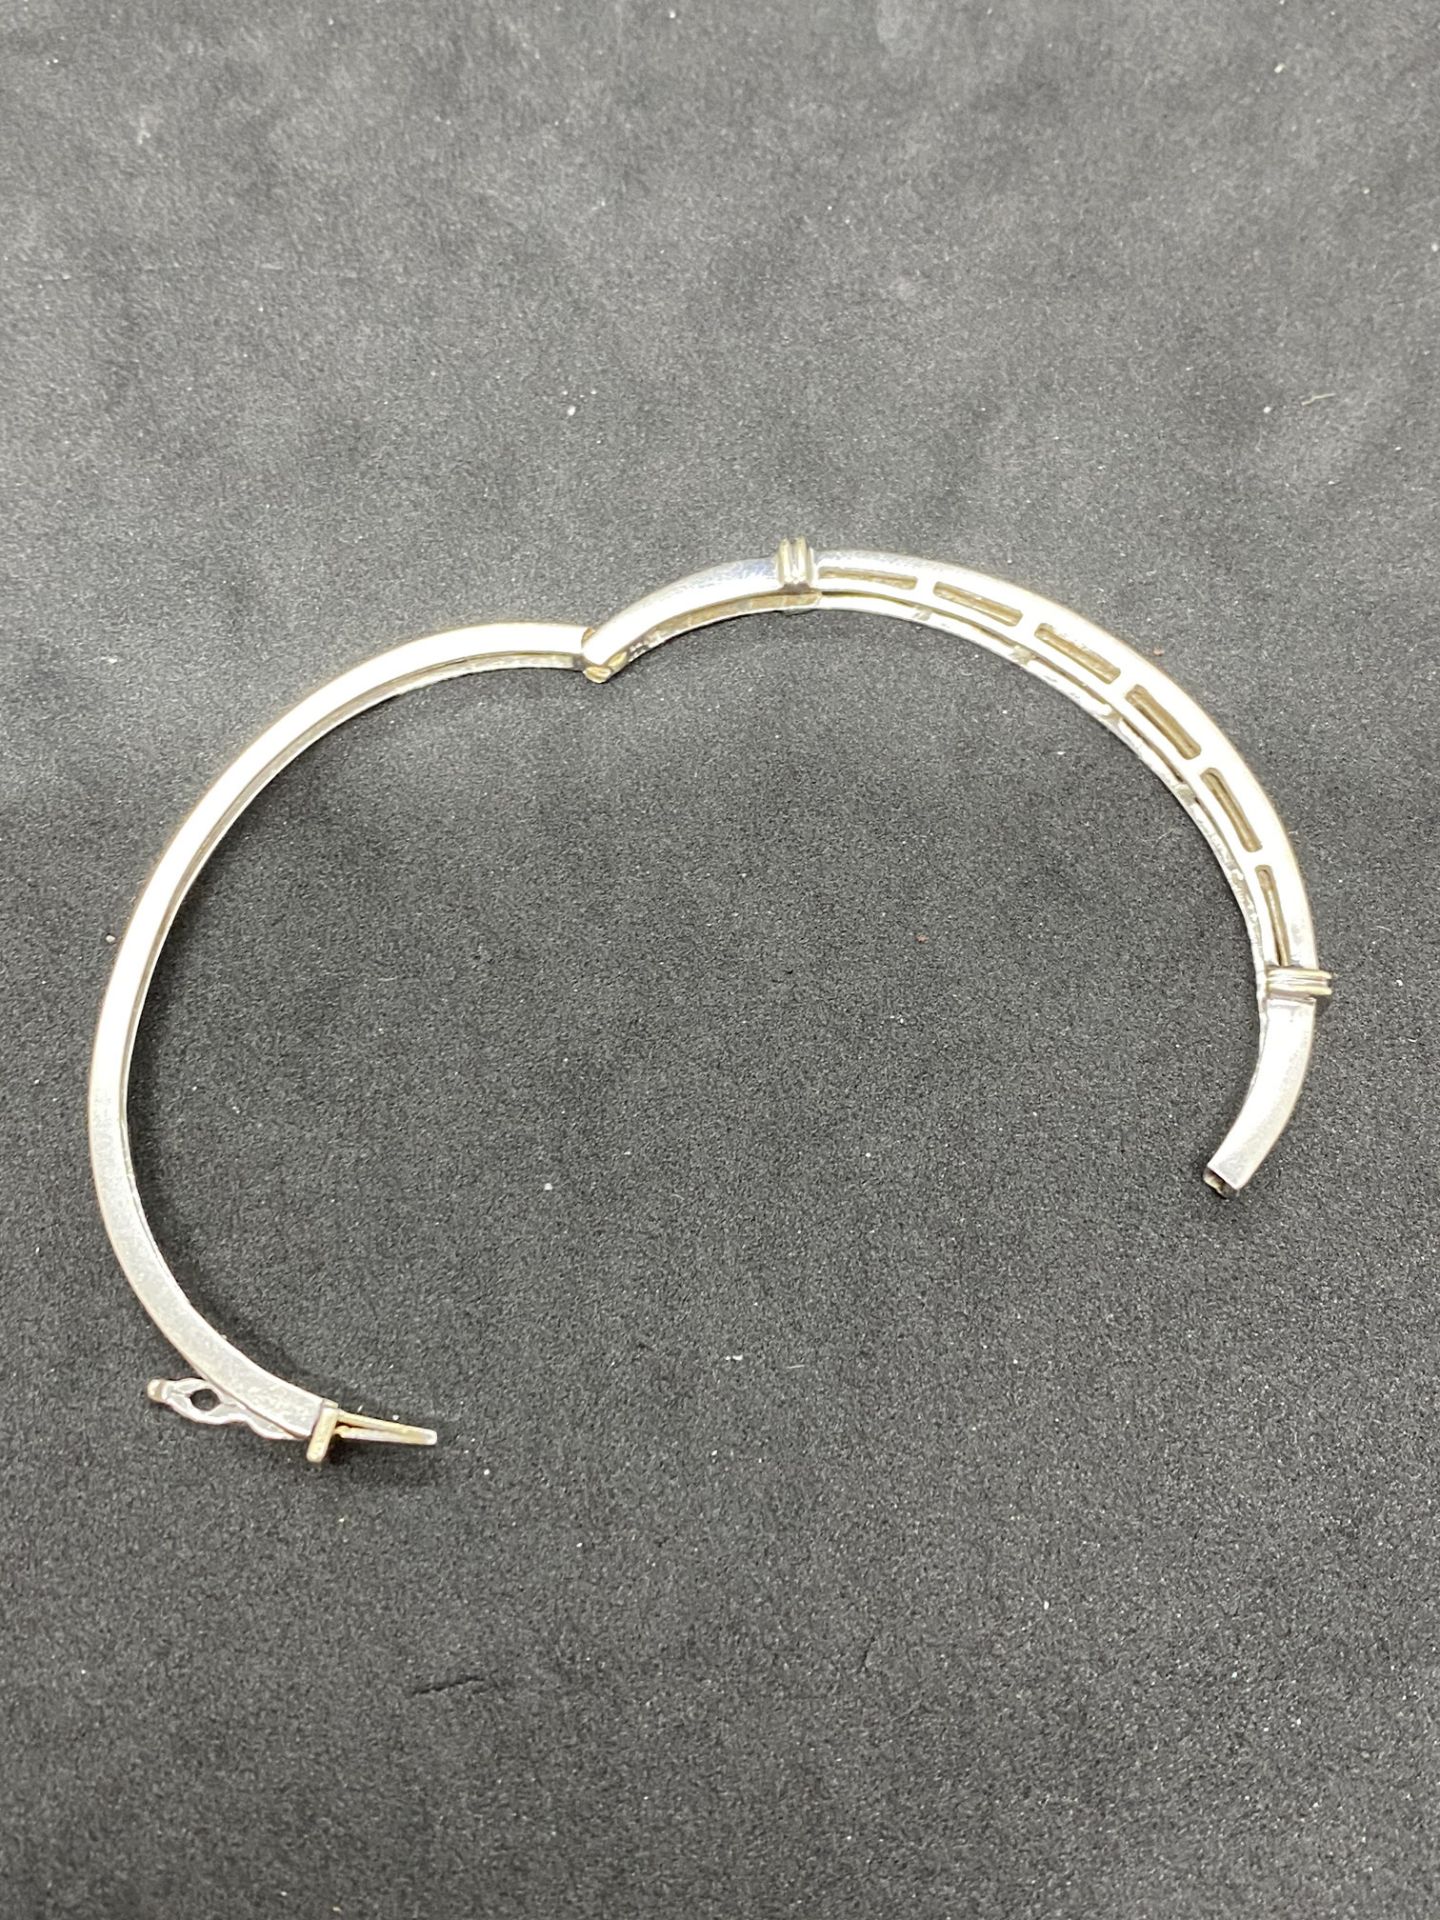 18ct WHITE GOLD APPROX 2.00ct DIAOND SET BANGLE - 15 GRAMS - Image 6 of 6